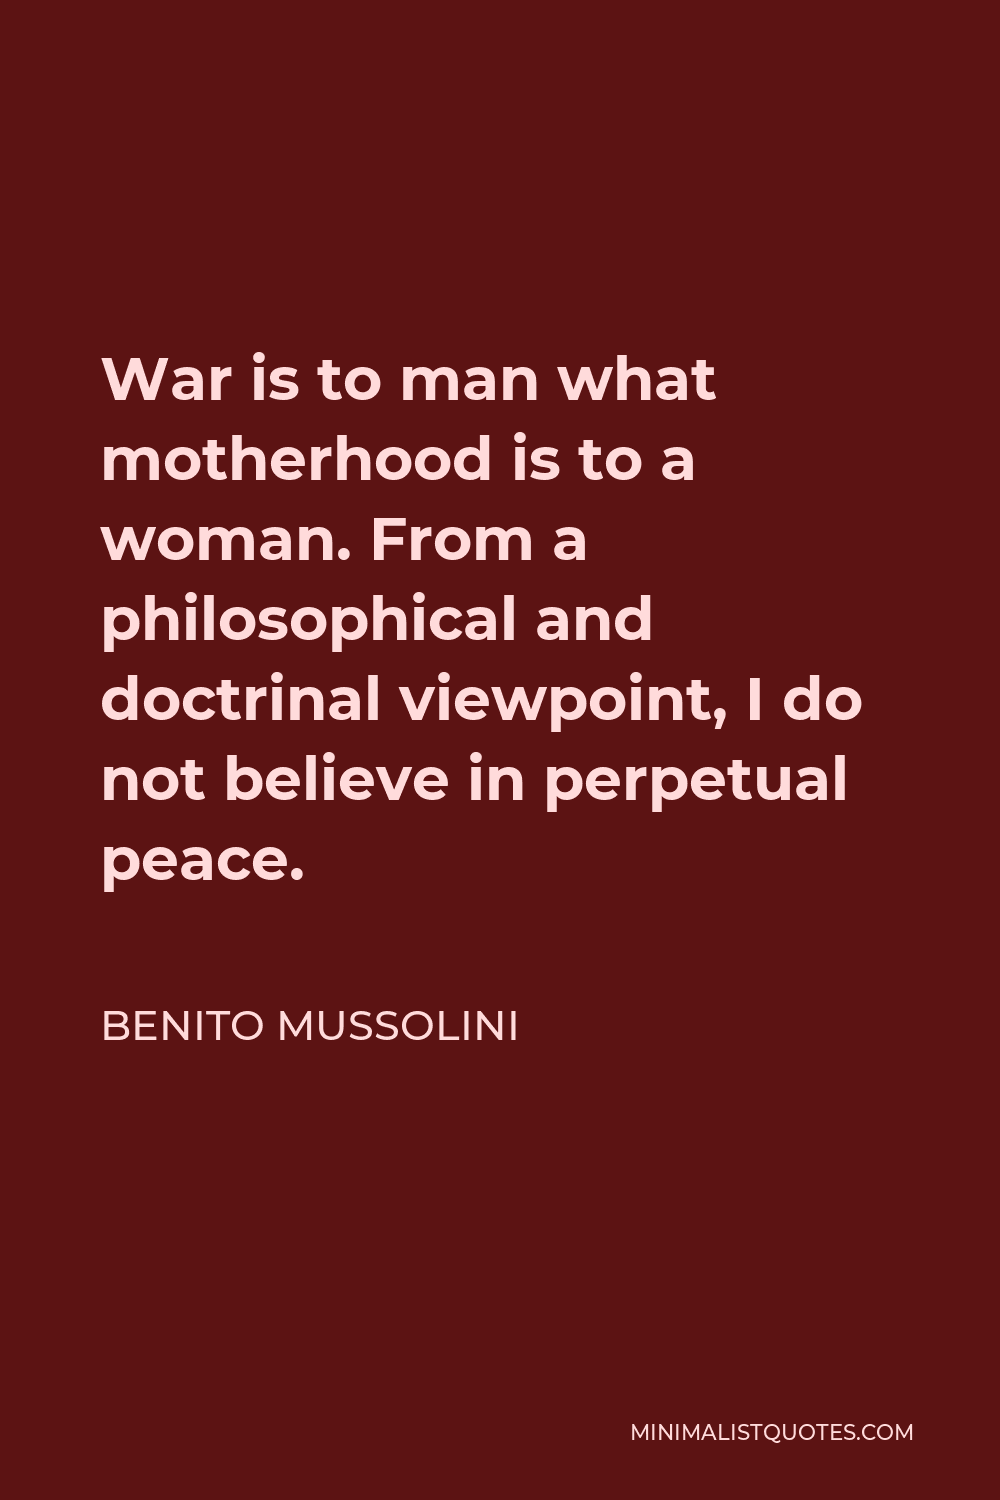 Benito Mussolini Quote - War is to man what motherhood is to a woman. From a philosophical and doctrinal viewpoint, I do not believe in perpetual peace.